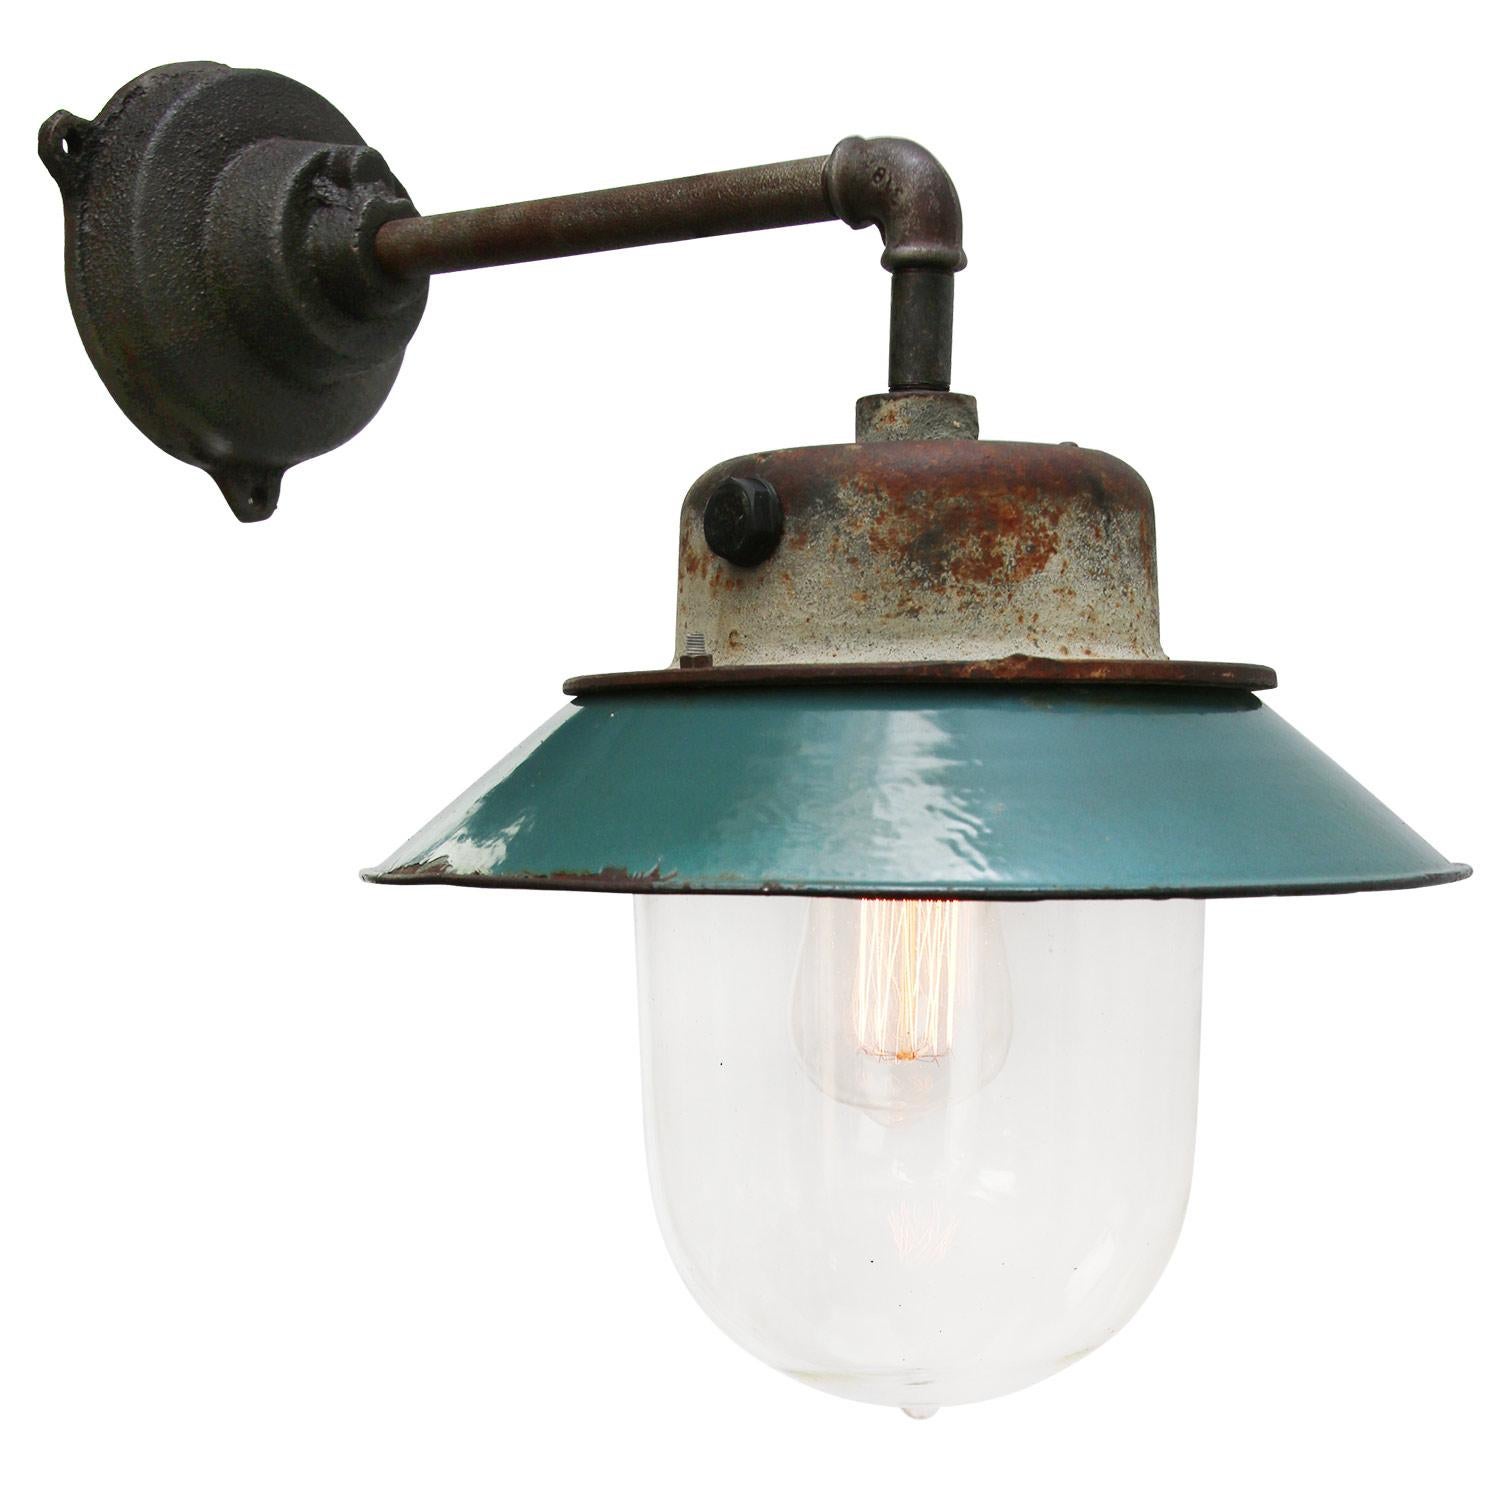 Petrol enamel industrial wall lamp with white interior.
Petrol cast aluminium top, cast iron arm
Clear glass 

Diameter cast iron wall piece: 12 cm. Three holes to secure.

Weight: 4.00 kg / 8.8 lb

Priced per individual item. All lamps have